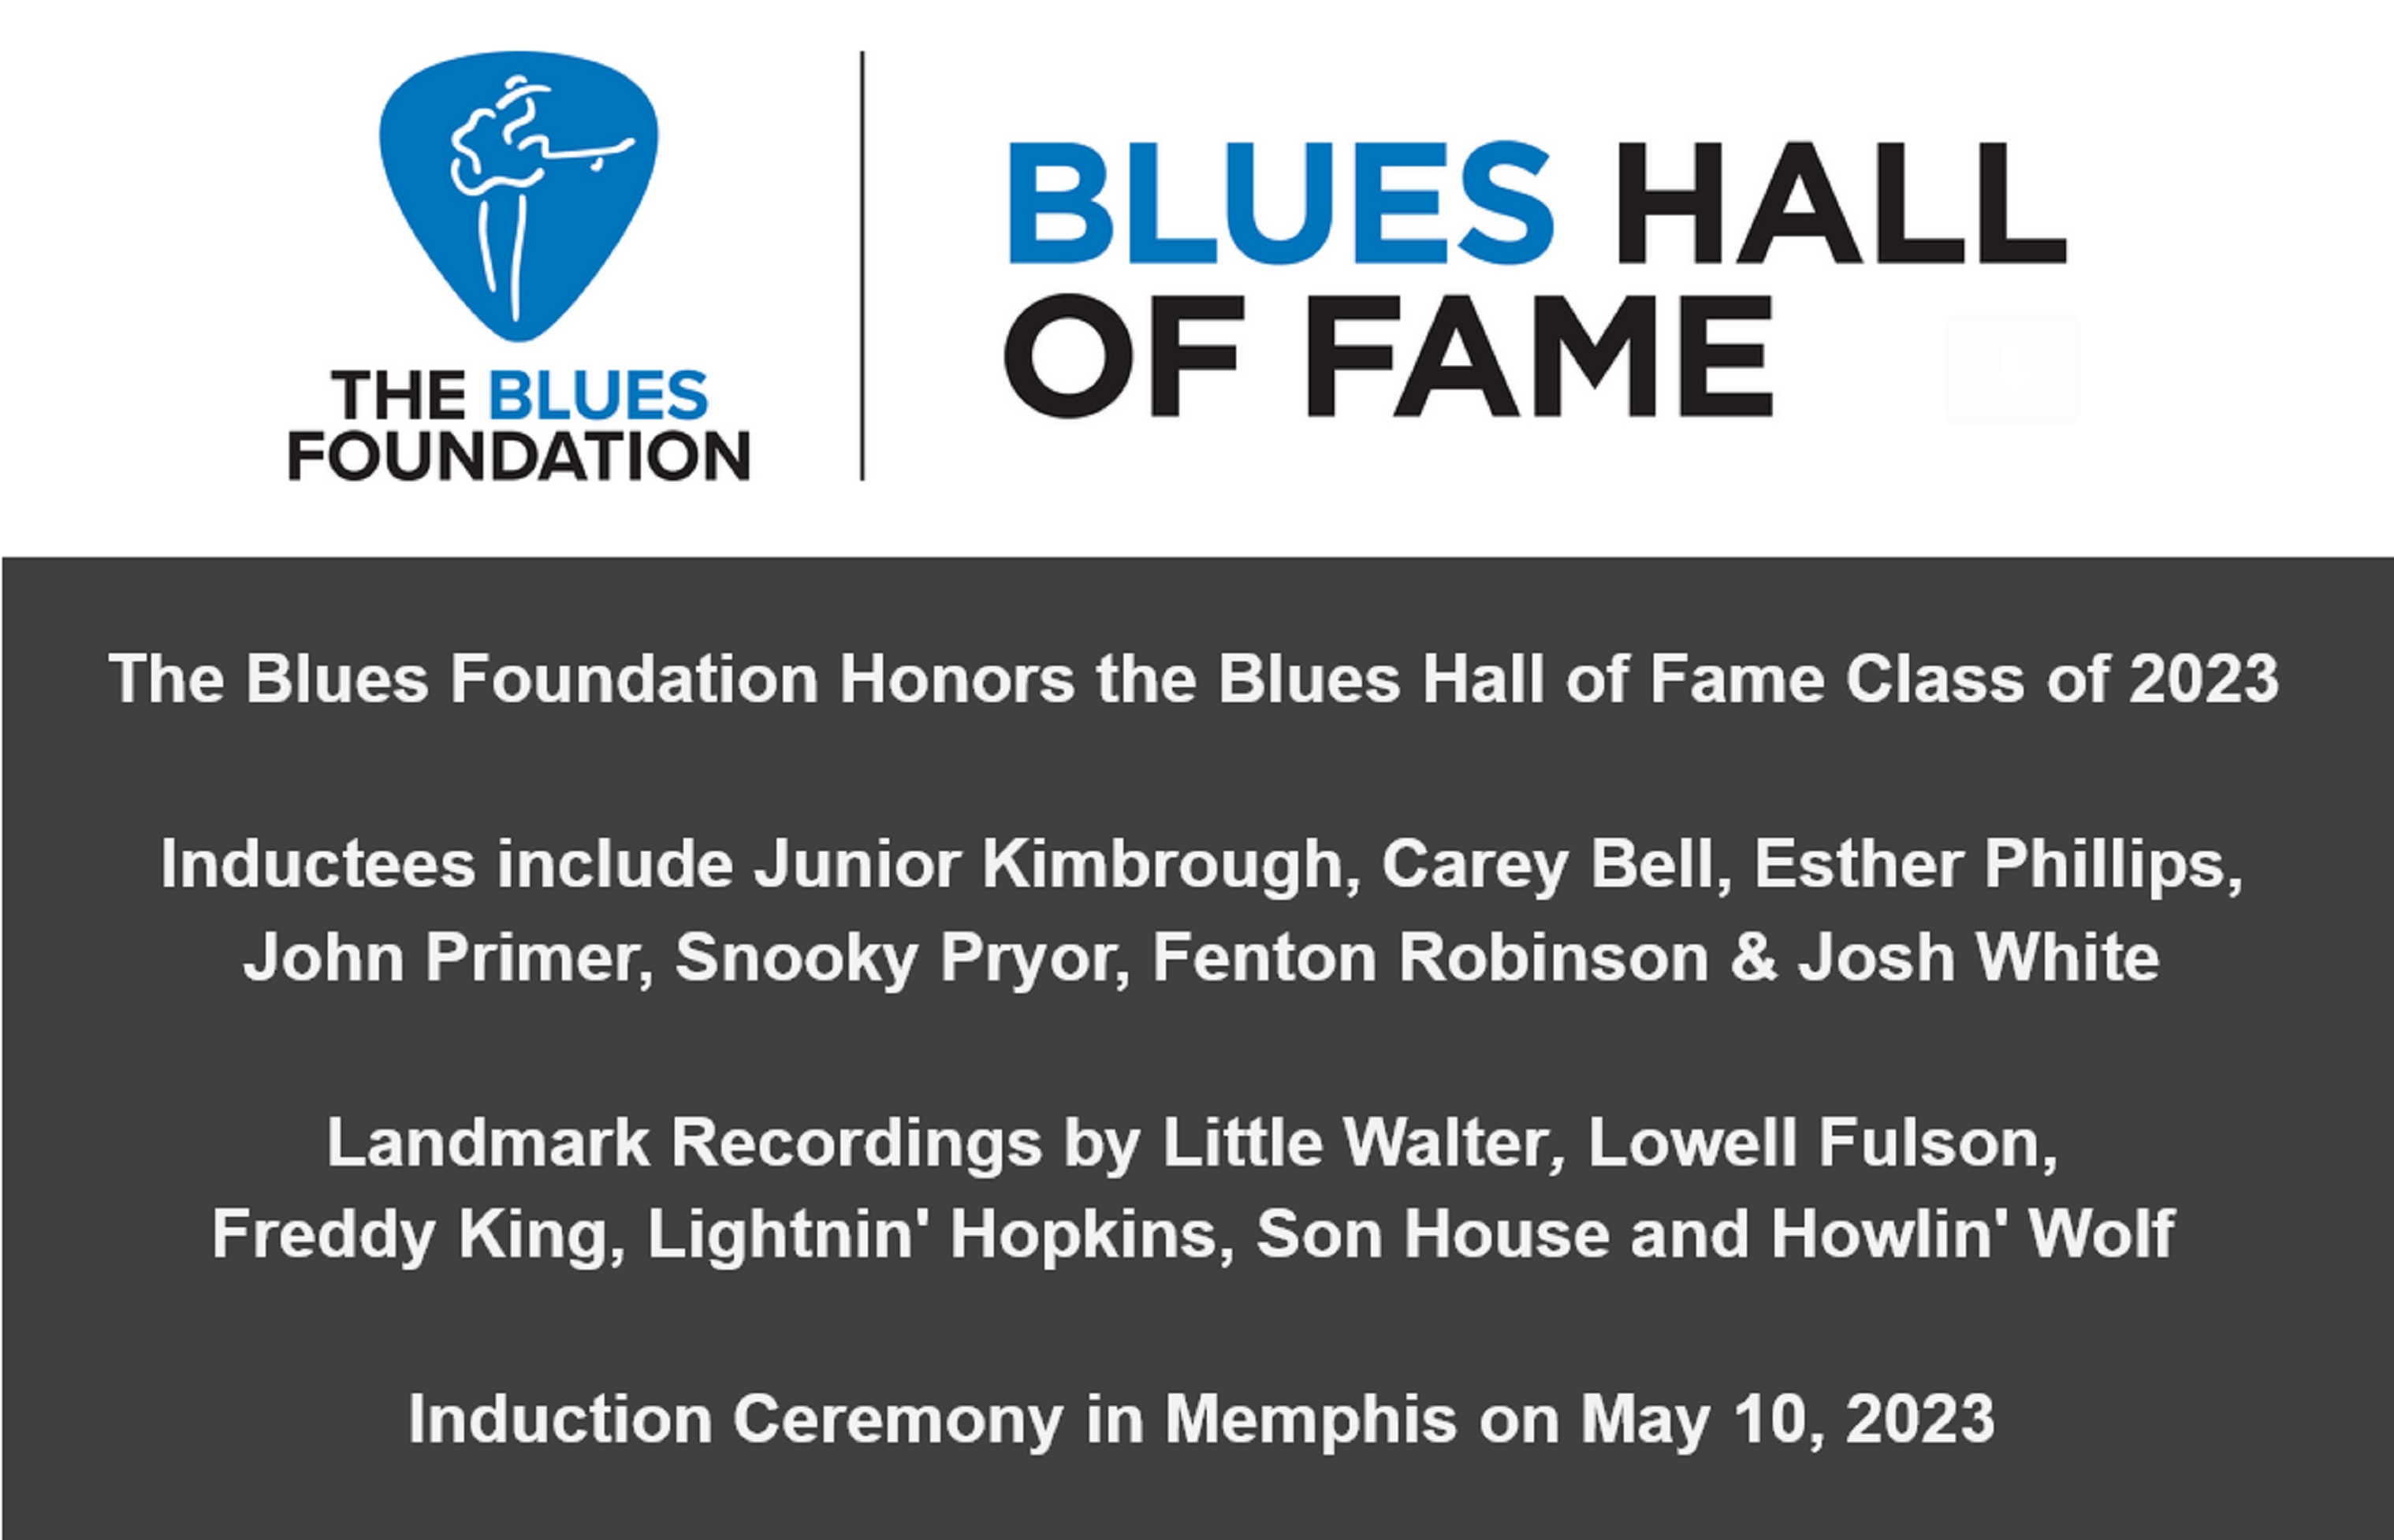 Blues Hall of Fame 2023 Inductees Announced